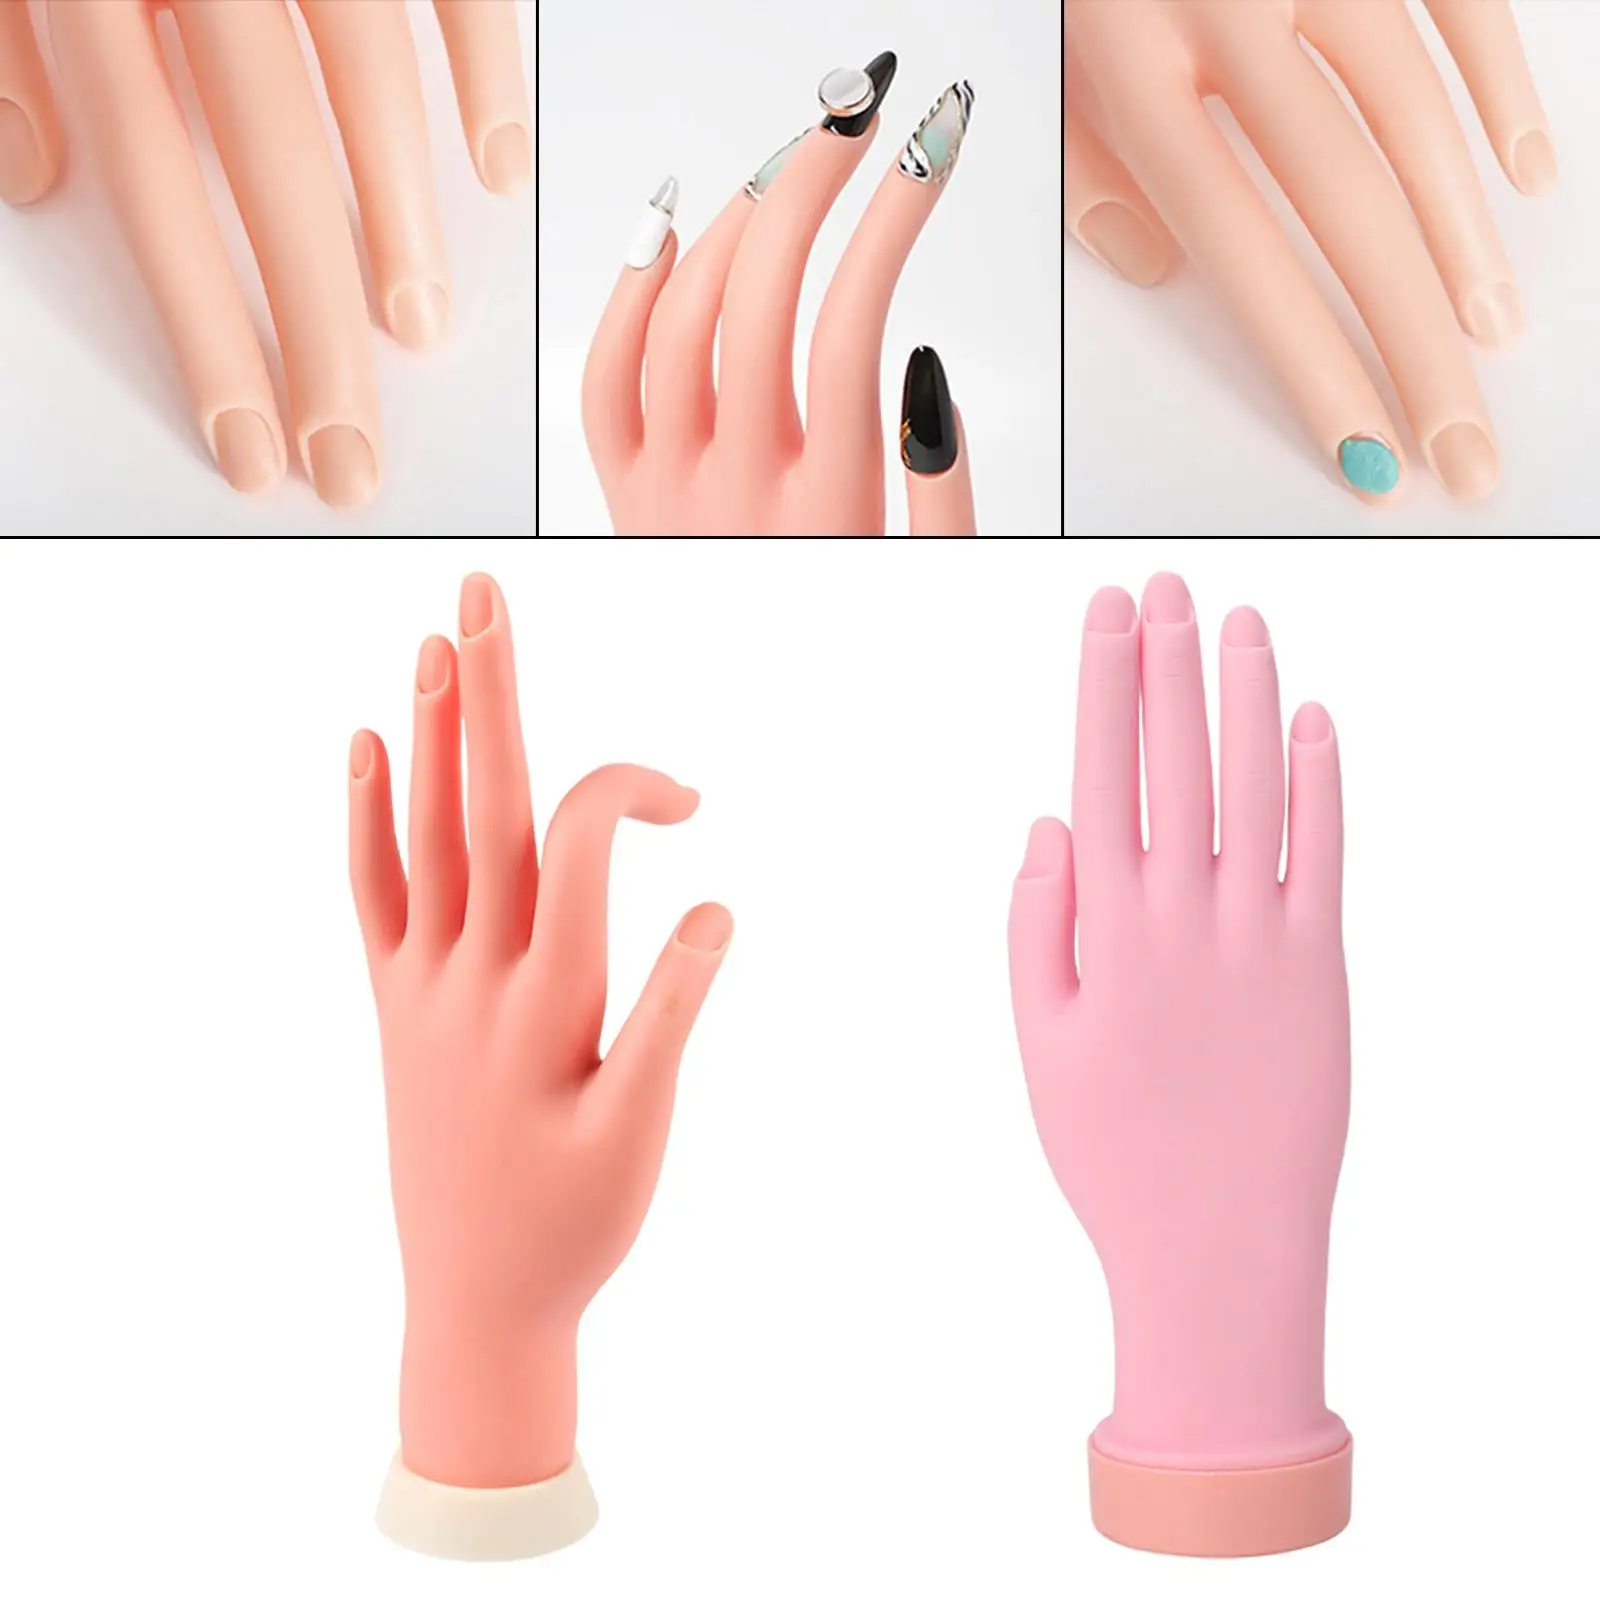 Nail Training Hand Manicure Practice DIY Nail Display for Beginner Nail Practice Hand Kits Nails Tool Soft Hand Training Model